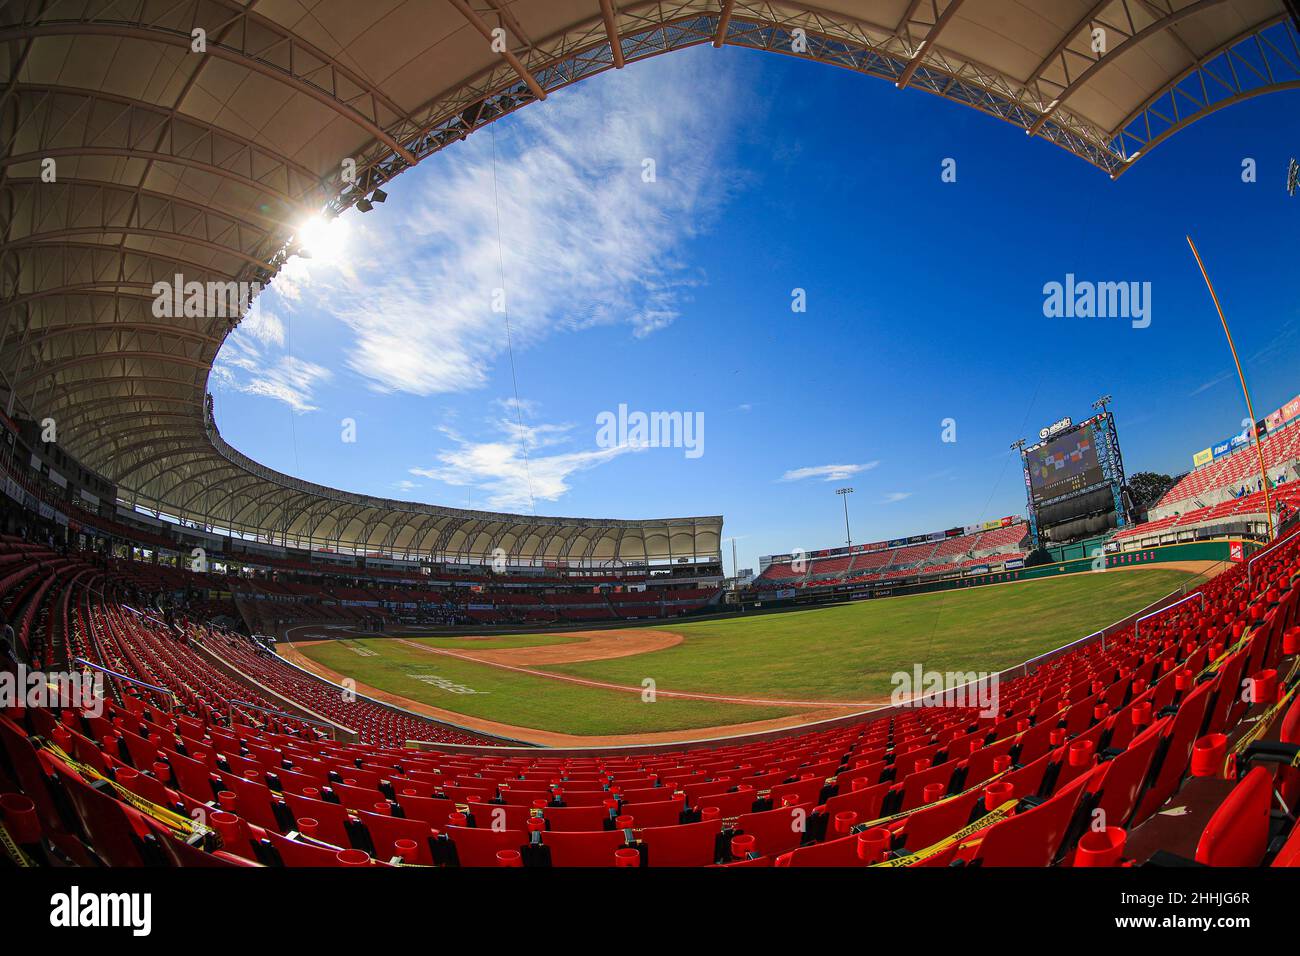 MAZATLAN, MEXICO - FEBRUARY 05:  baseball field diamond with light and shadow at sunset in a general view  Teodoro Mariscal of the Stadium  diamanete del campo de besbol con luz y sombra al atardecer en una vista general del Estadio Teodoro Mariscal   , during a match between Dominican Republic and Panama as part of Serie del Caribe 2021 at Teodoro Mariscal Stadium on February 5, 2021 in Mazatlan, Mexico. (Photo by Luis Gutierrez/ Norte Photo) Stock Photo